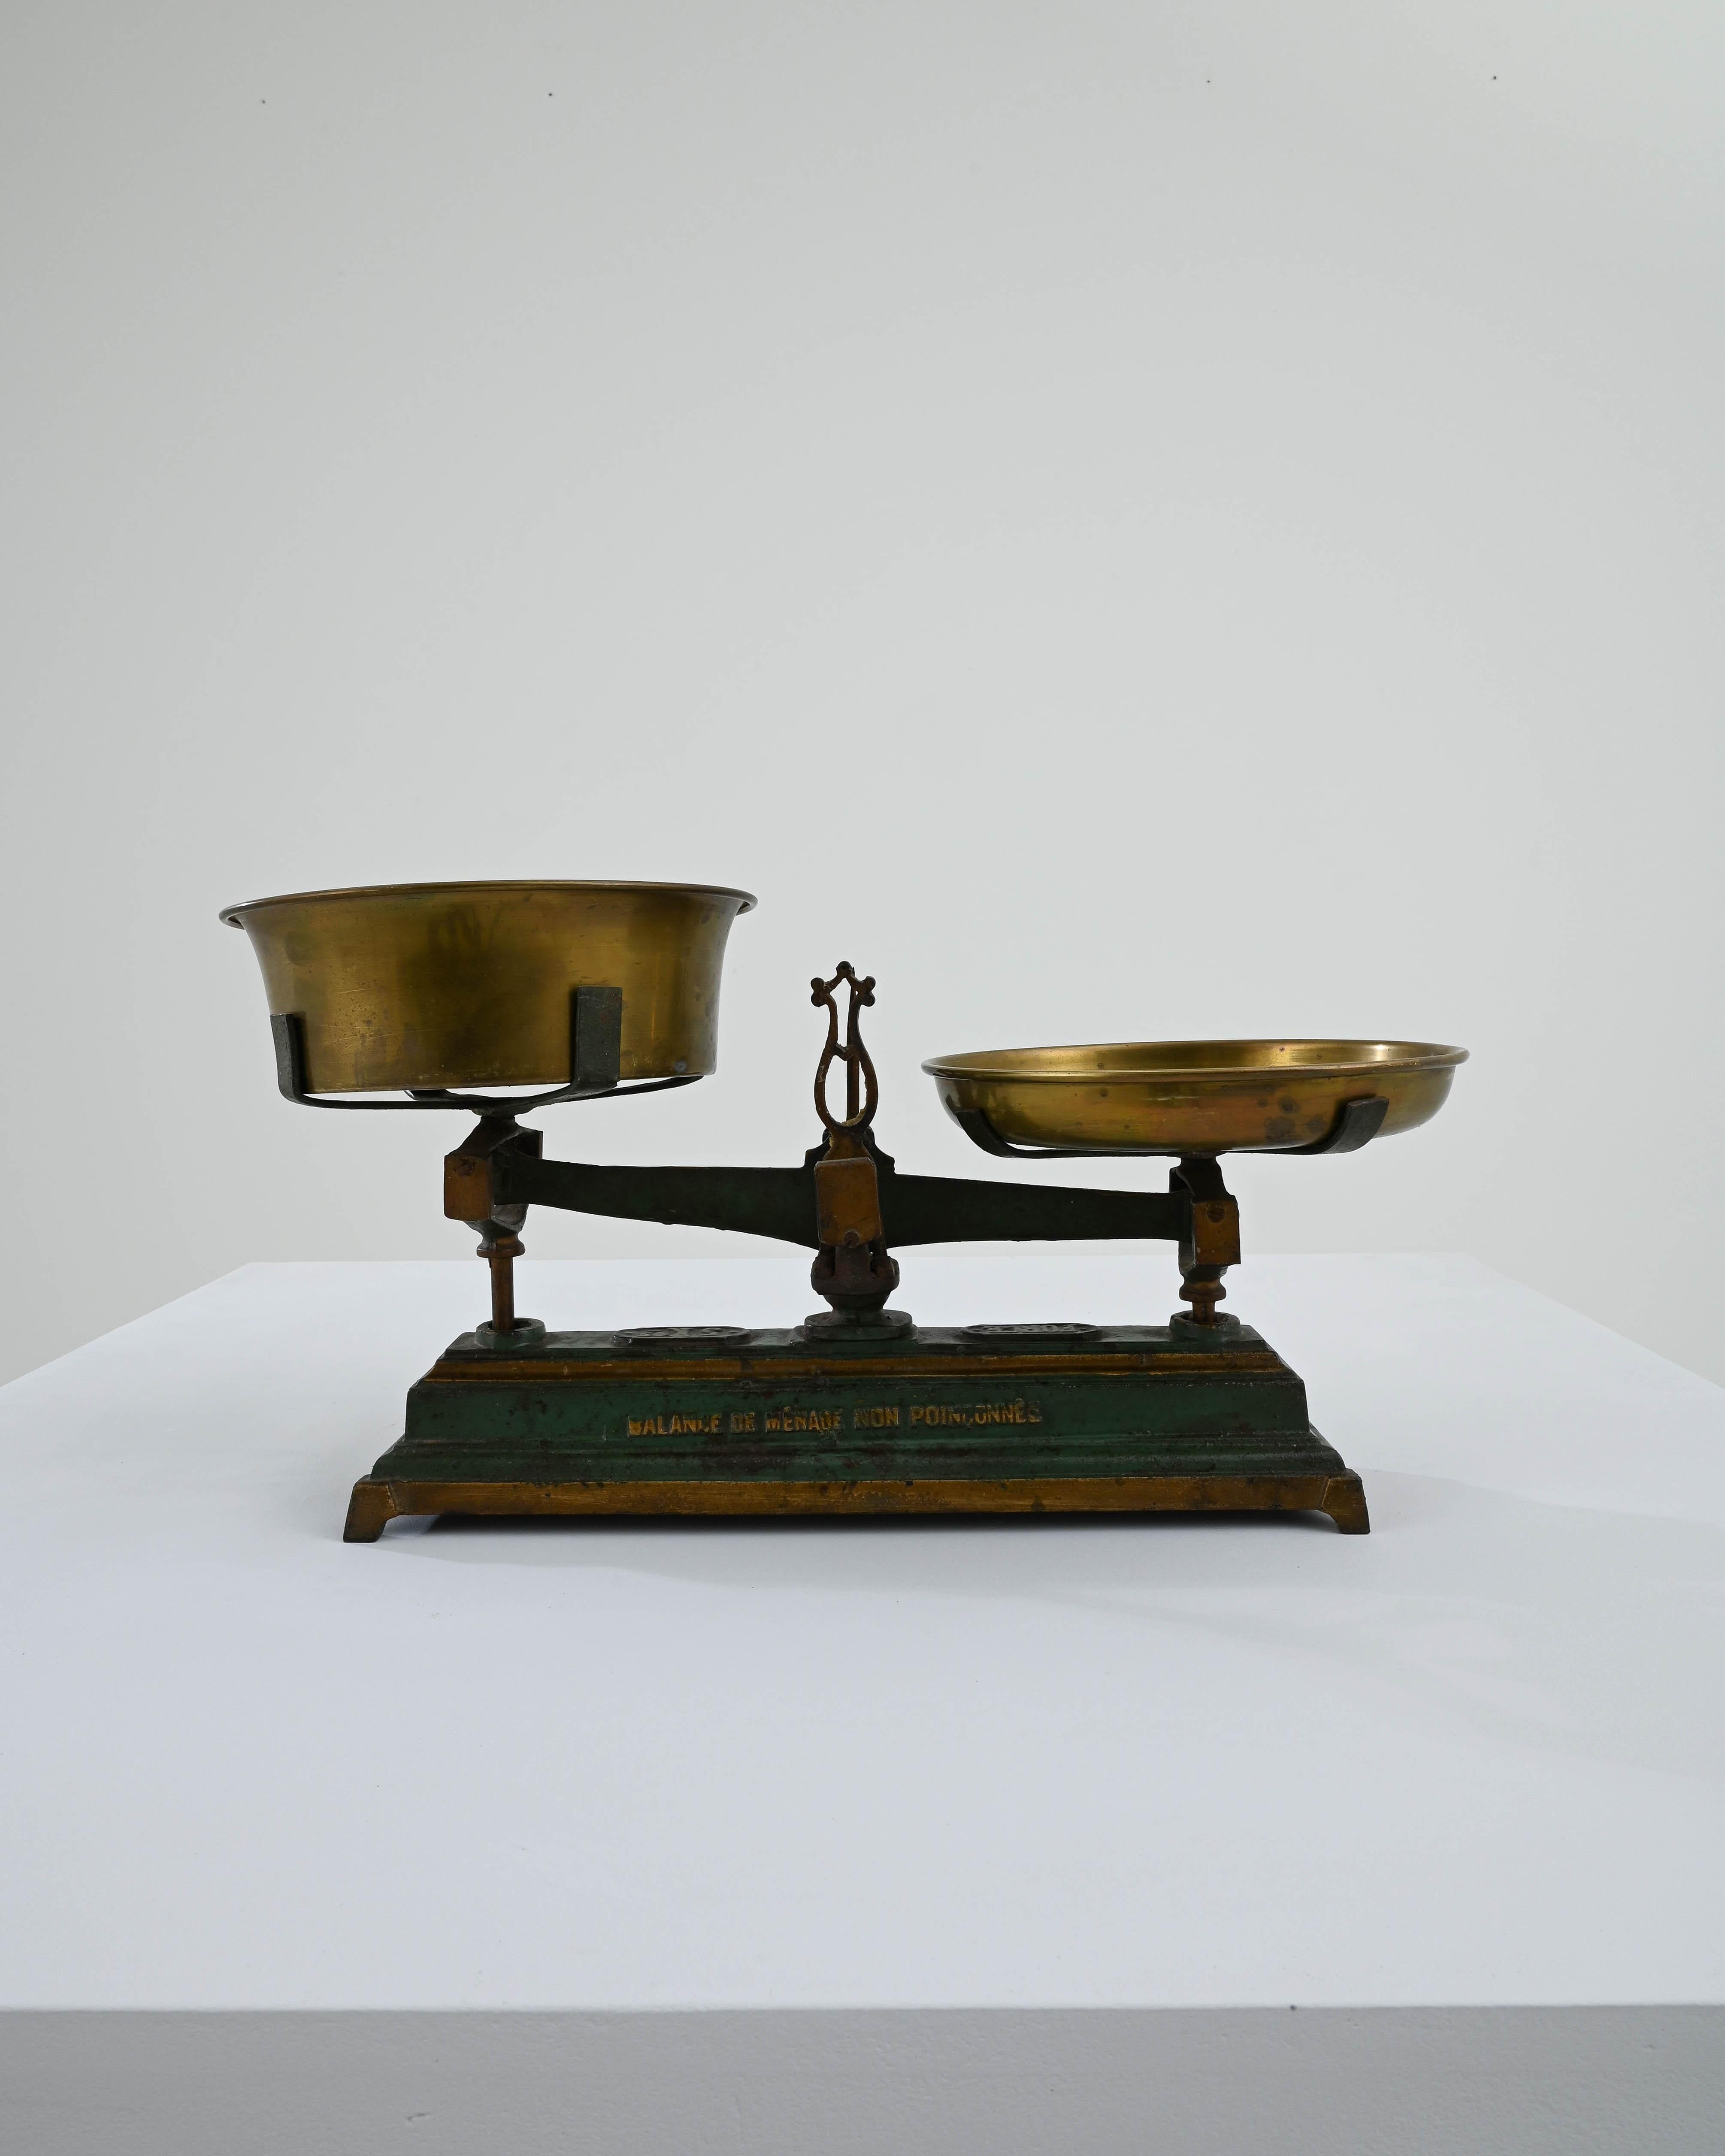 This cast iron scale was made in France, circa 1900. A household and marketplace classic, scales of these dimensions were commonly used to weigh fruits and vegetables. Fully functional, the scale is equipped with brass weighing pans. The trays are